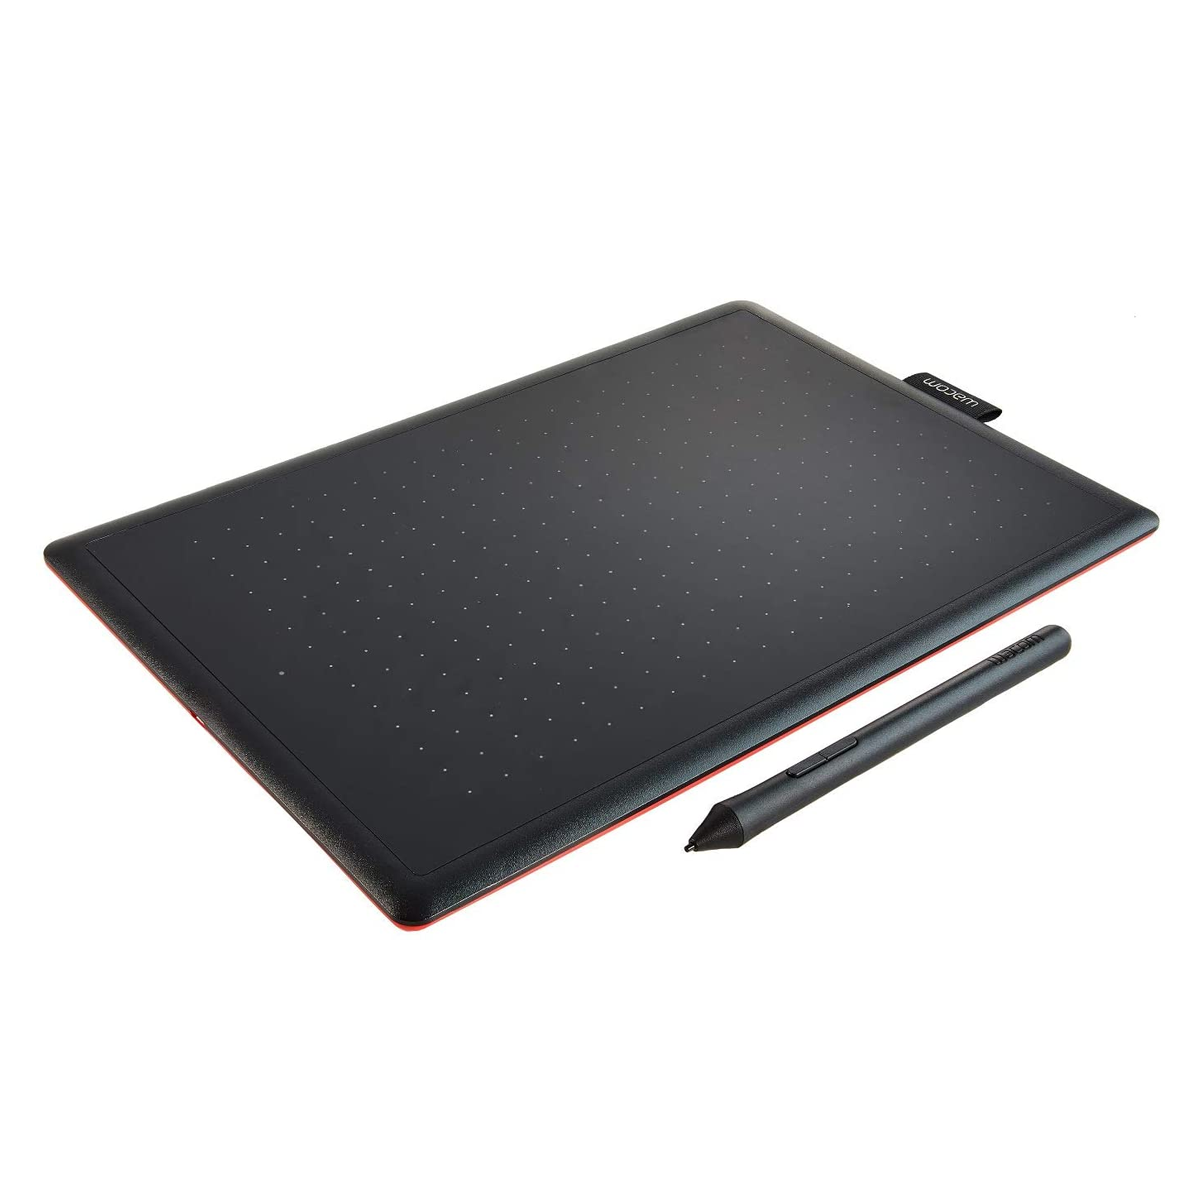 Wacom One Digital Drawing Tablet with Screen Graphics Display for Art and Animation - Medium